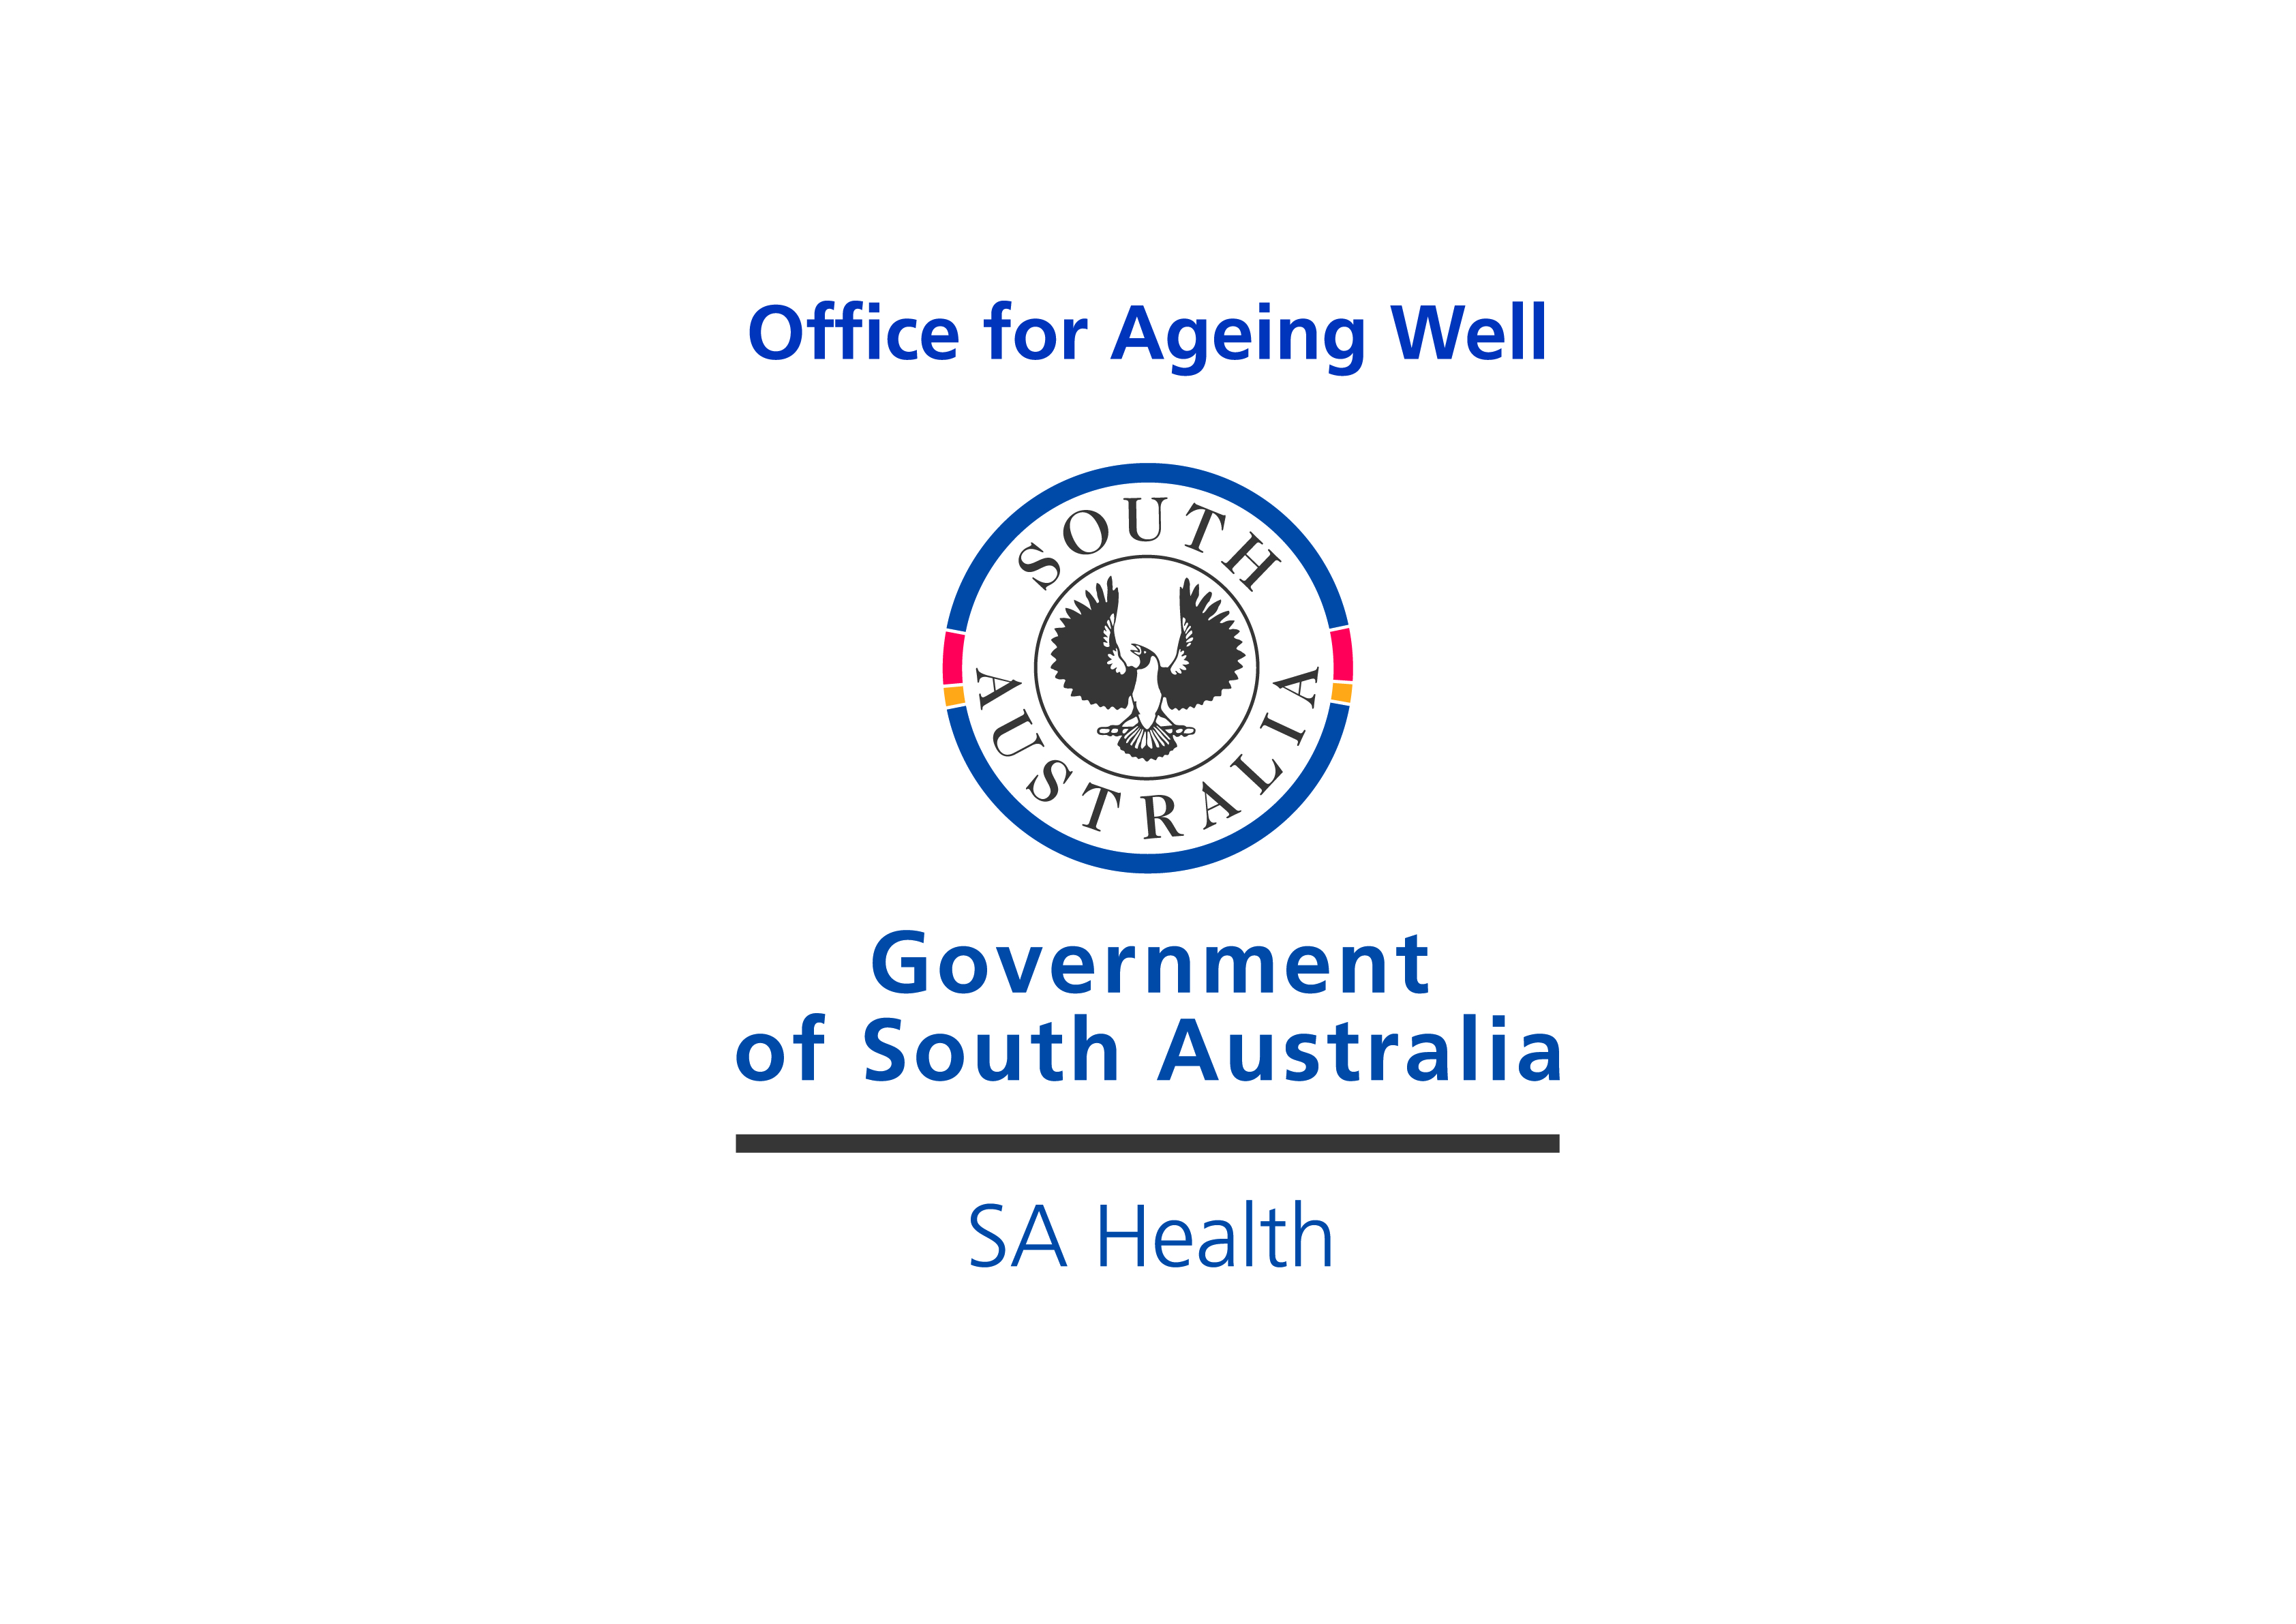 Office for Ageing Well Logo 2